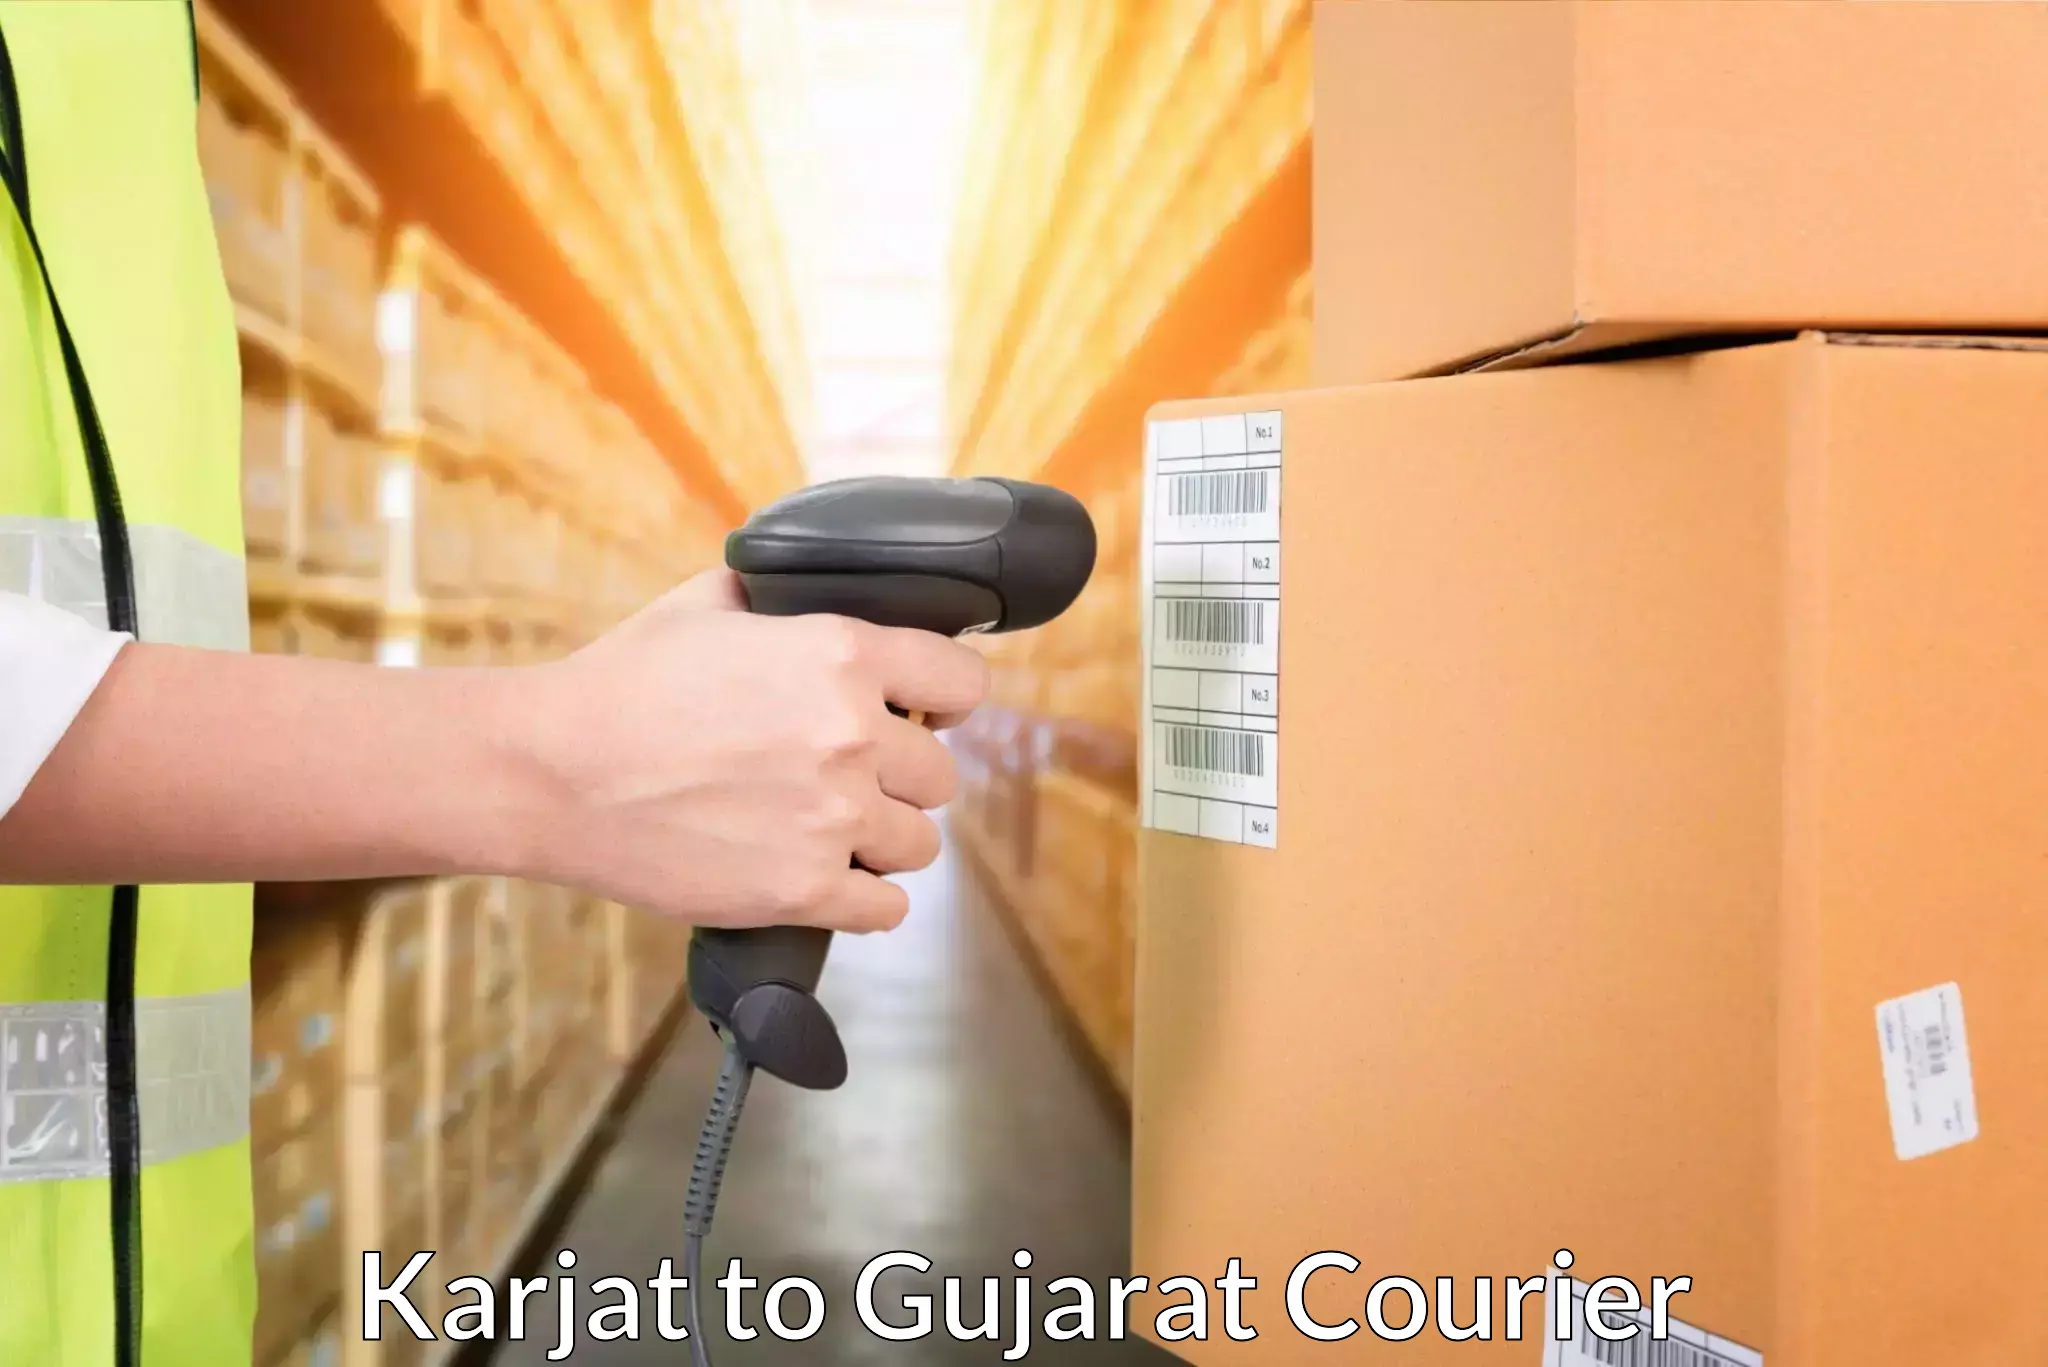 On-demand courier Karjat to Ahmedabad